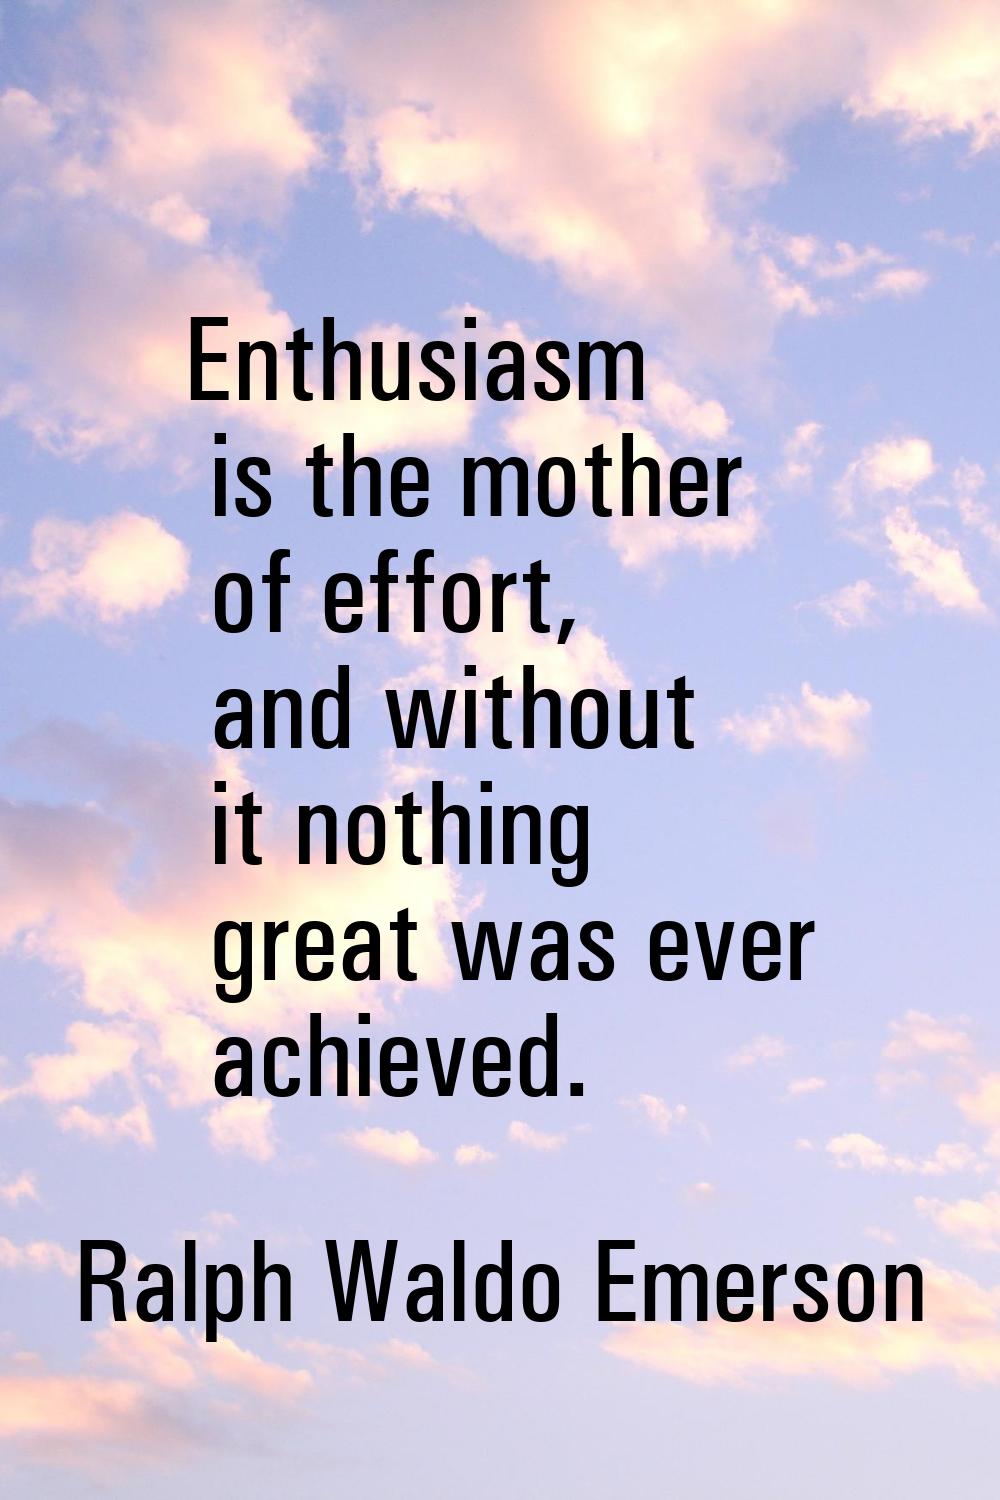 Enthusiasm is the mother of effort, and without it nothing great was ever achieved.